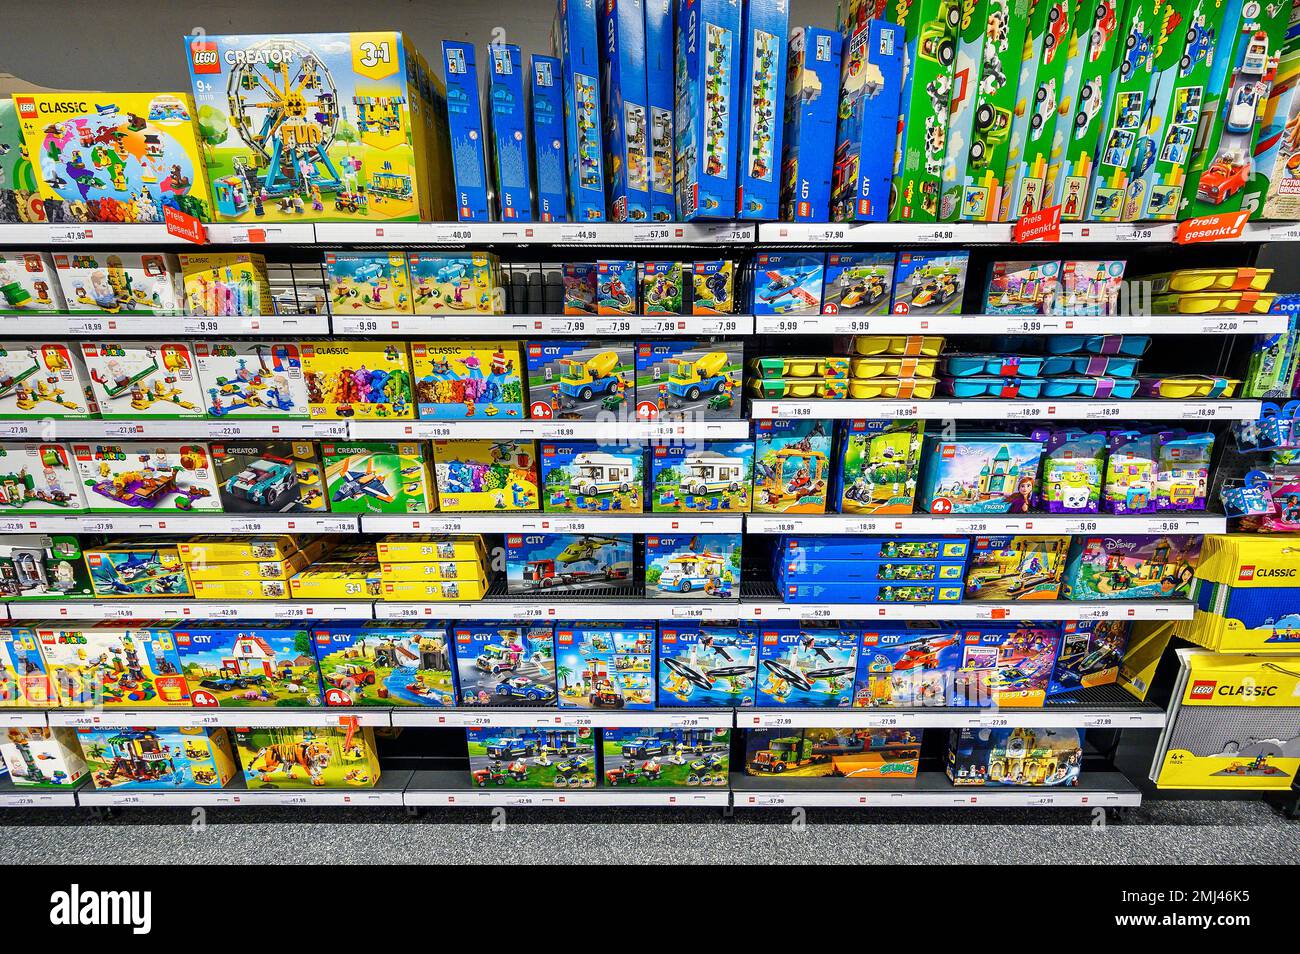 Shelf with Lego articles in the wholesale market, Bavaria, Germany Stock Photo